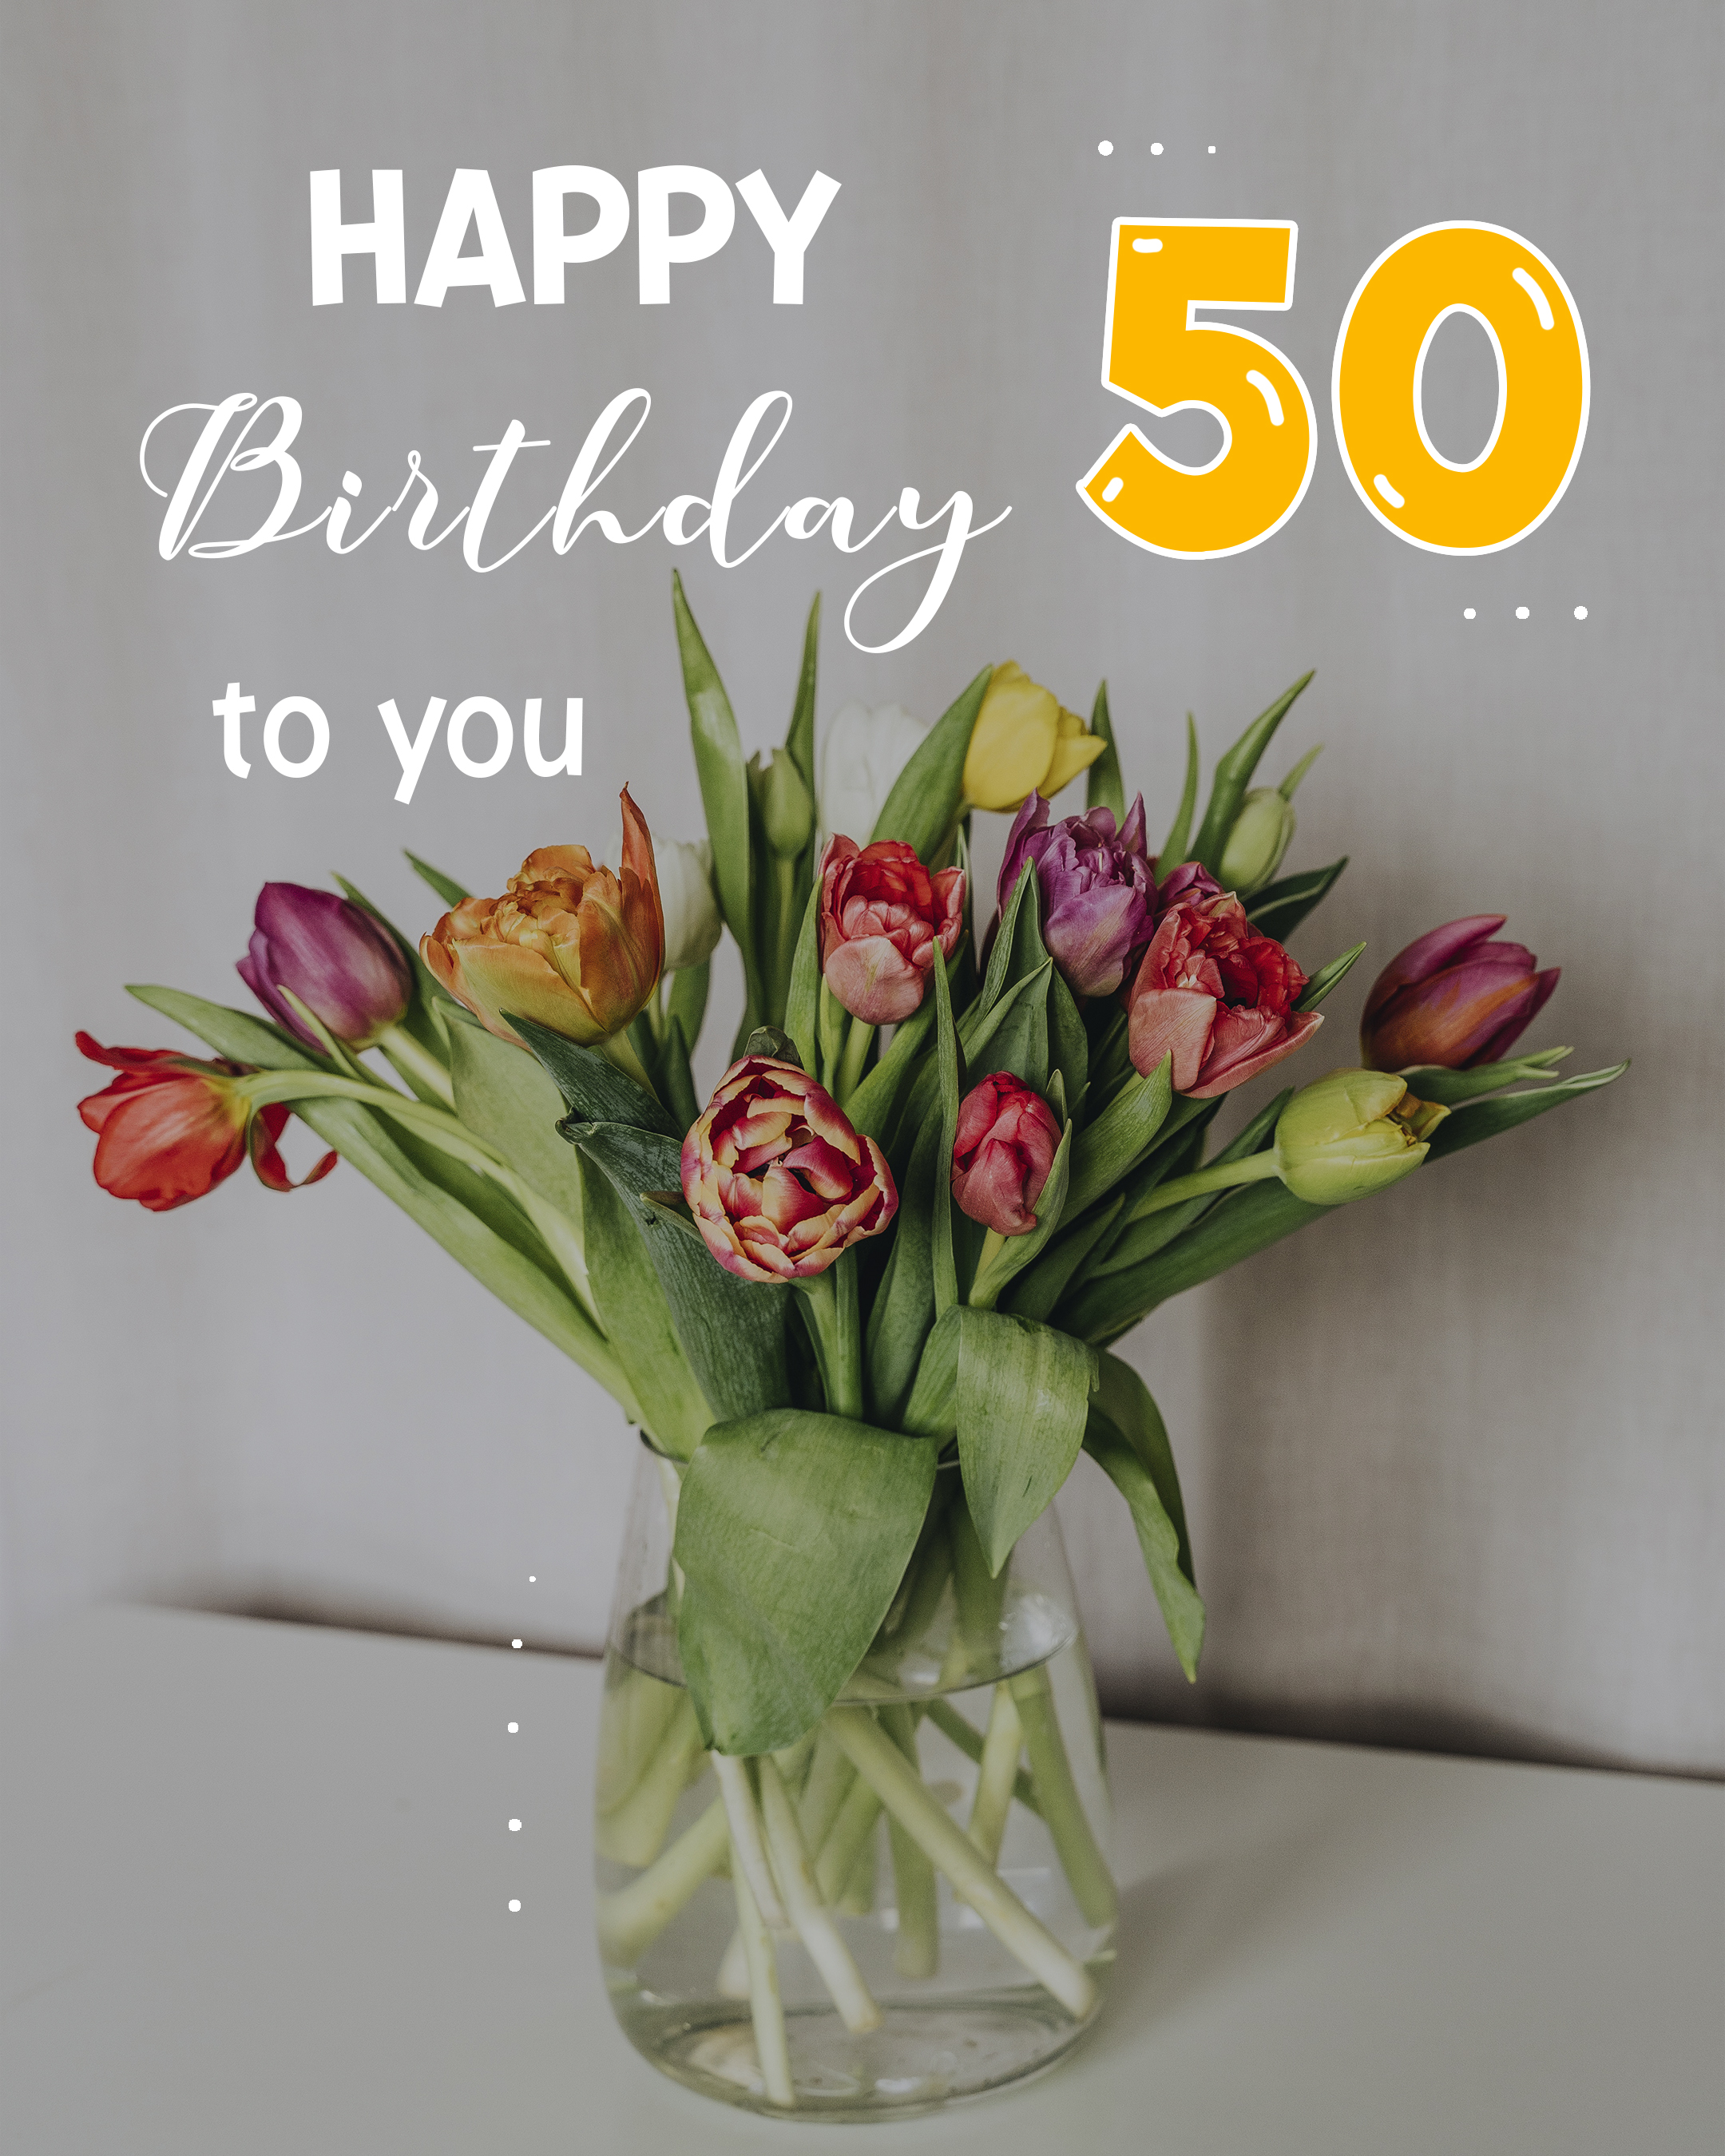 Free 50 Years Happy Birthday Image With Flowers